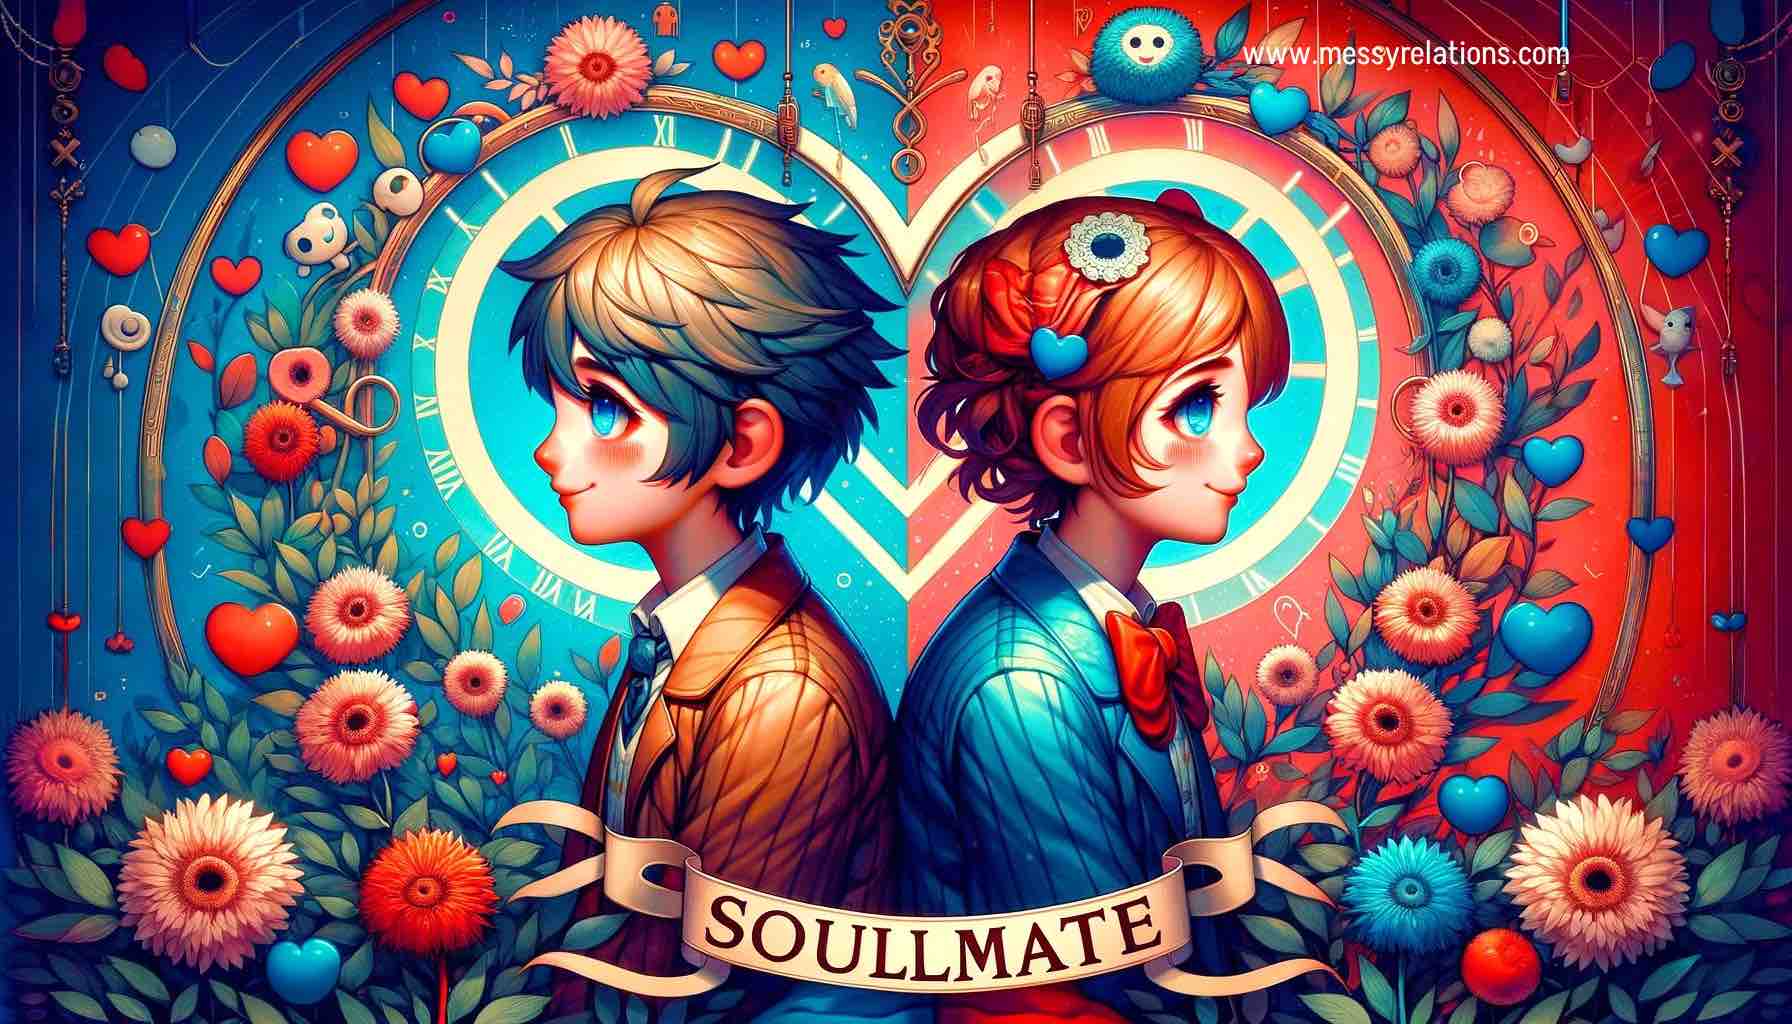 Who Are Soulmates